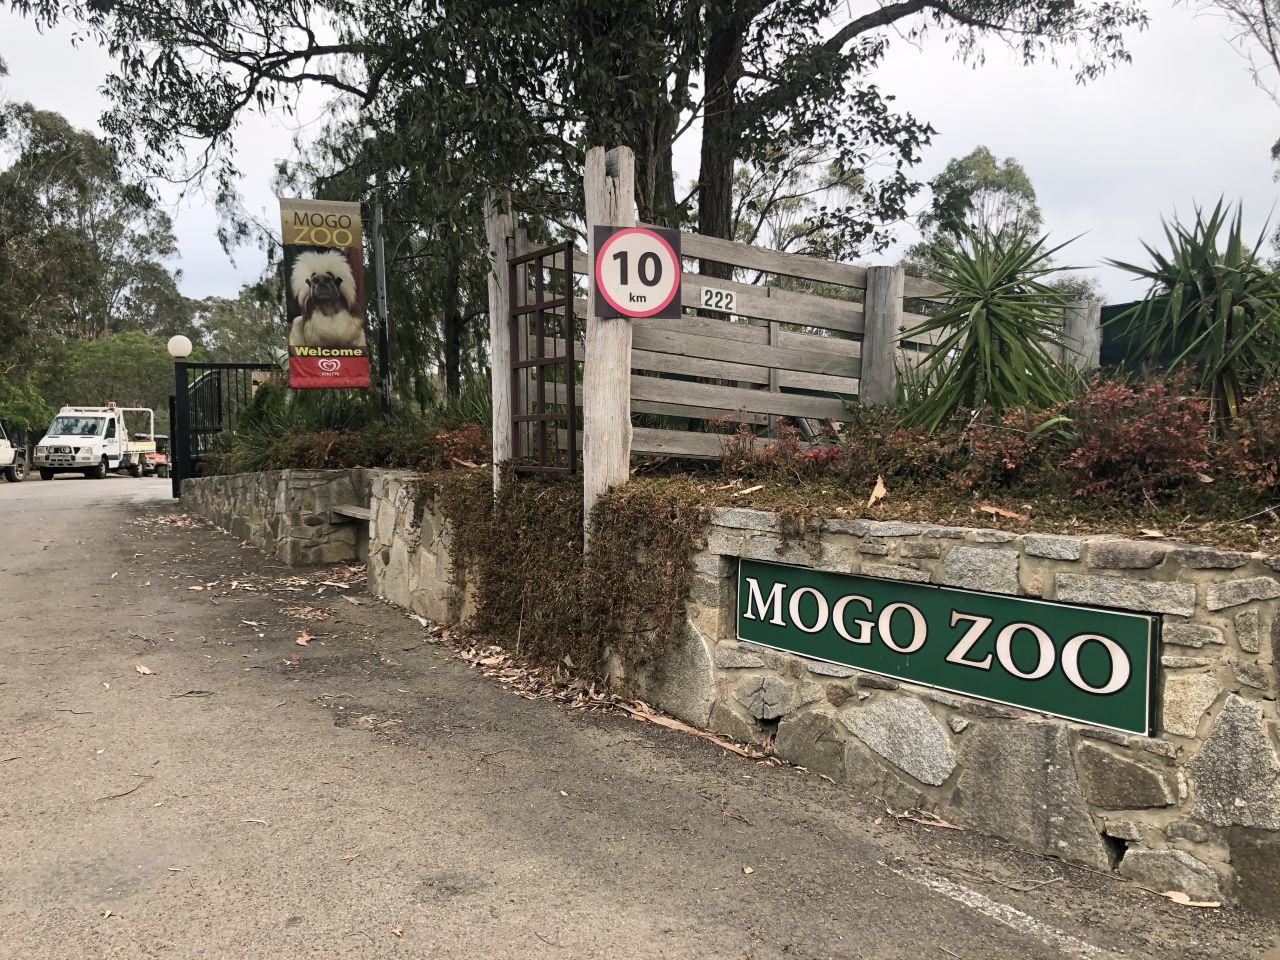 Mugu Wildlife Park is located in the small town of the same name on the coast of New South Wales, Australia.